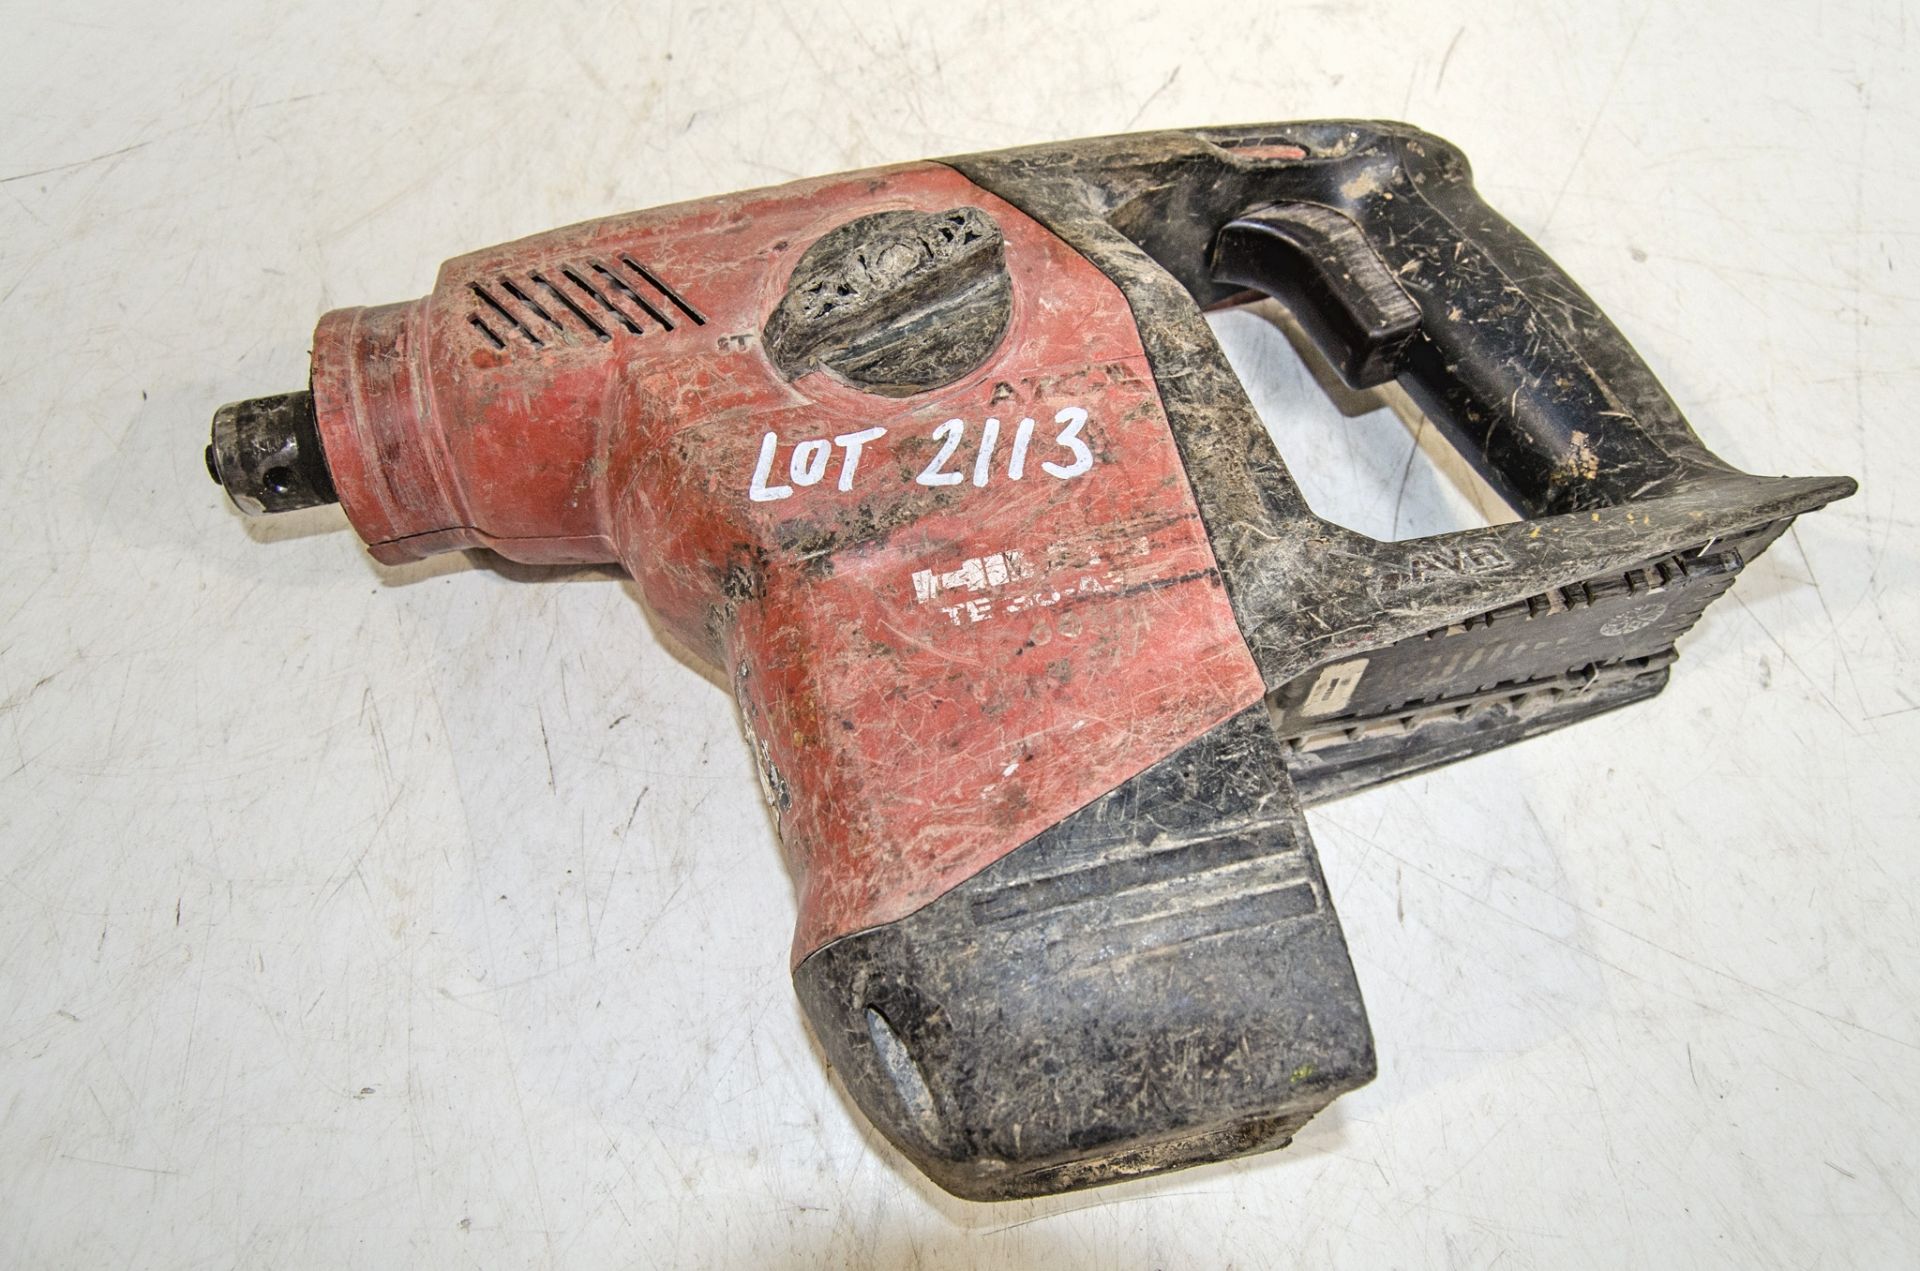 Hilti TE30-A36 36v cordless SDS rotary hammer drill SPHC314 ** No battery, charger or chuck **